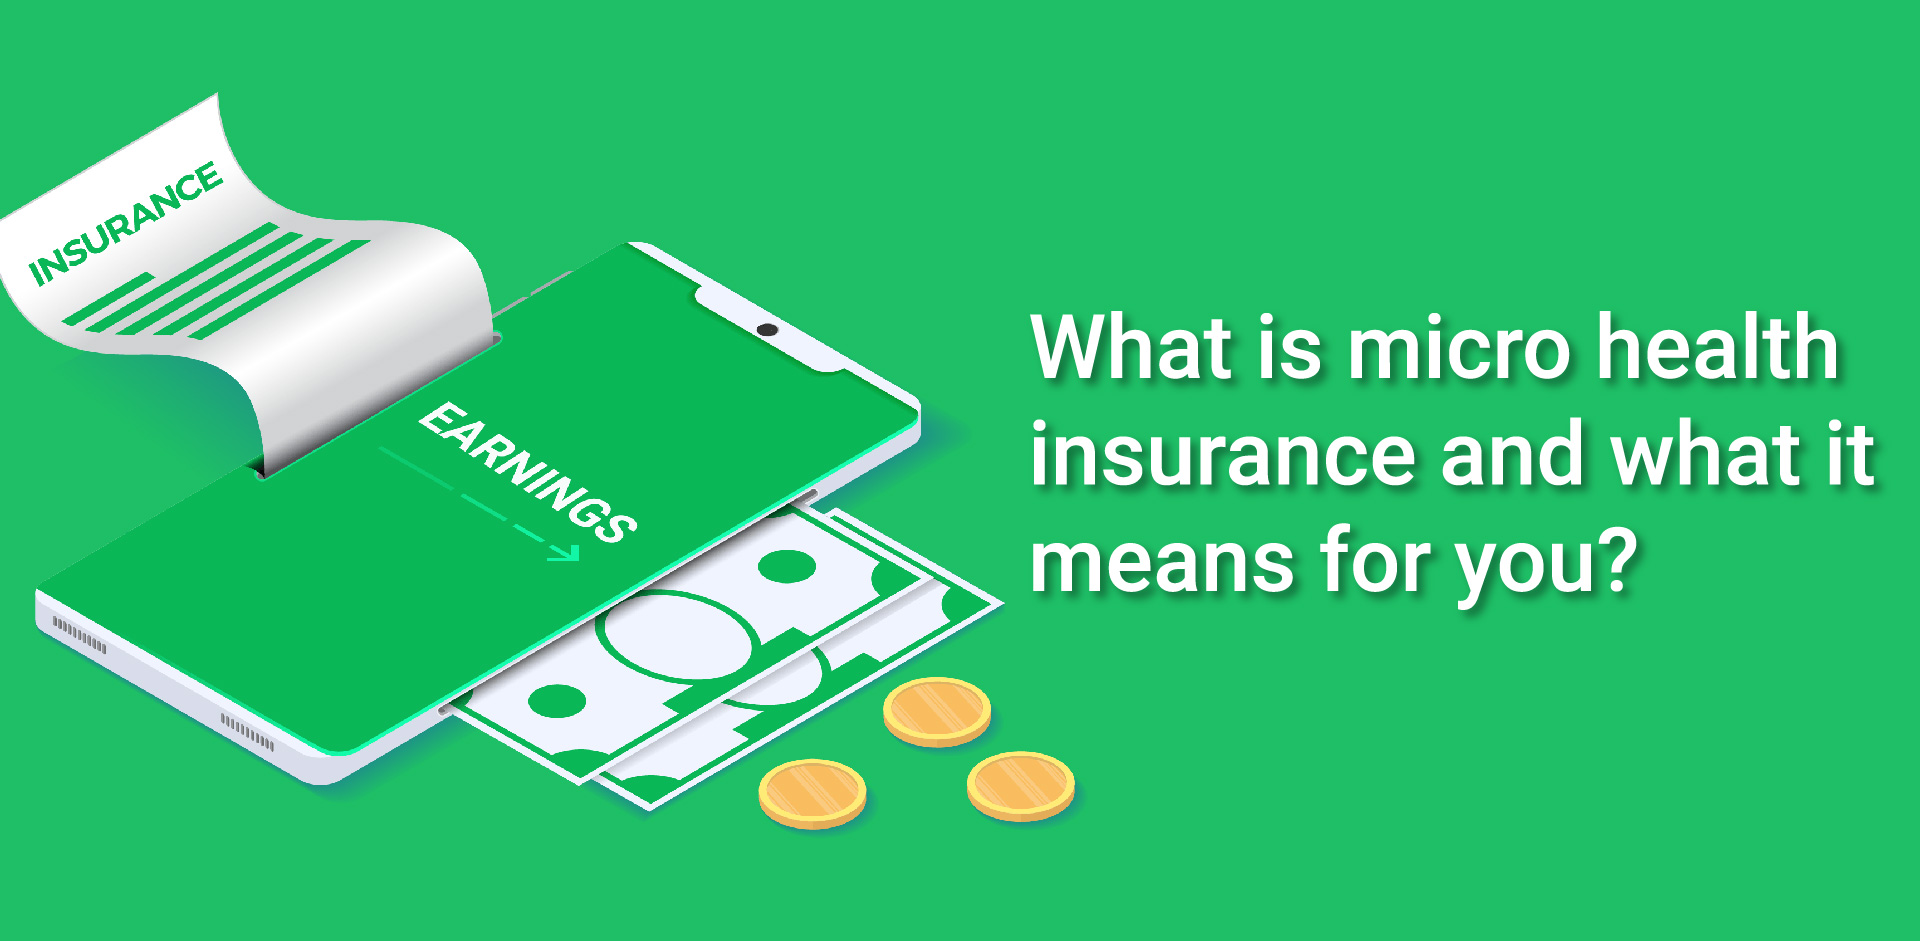 What is micro health insurance and what it means for you?